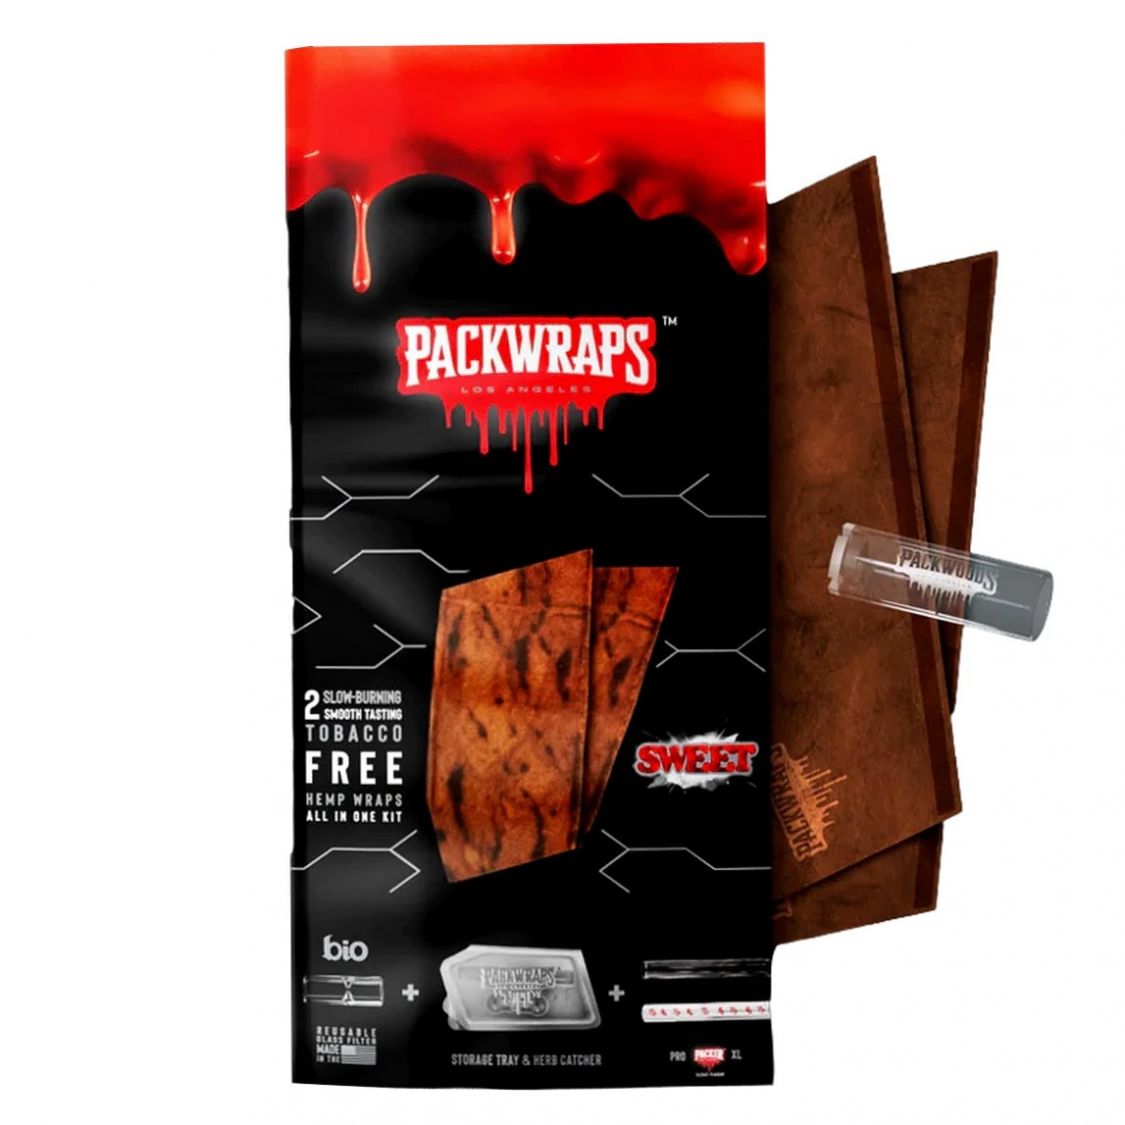 PACKWRAPS Sweet flavour Packwraps Accessories Paper / Rolling Supplies